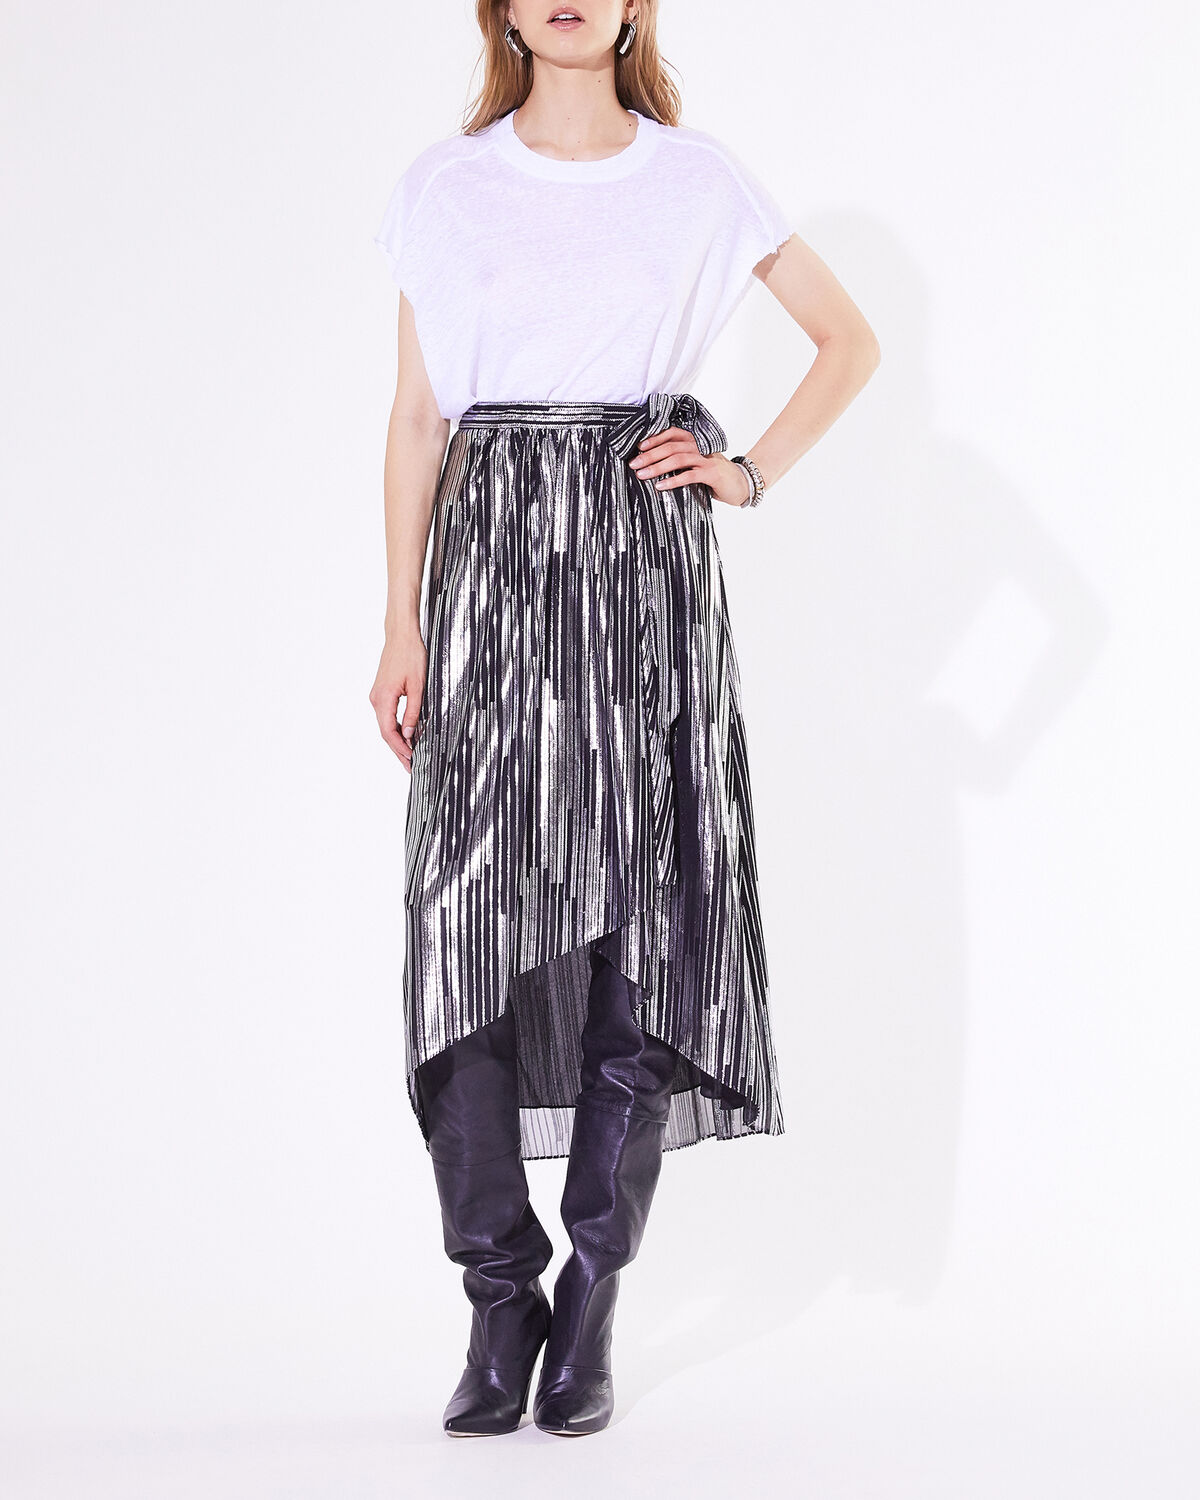 Photo of IRO Paris Dorie Skirt Black And Silver - This Asymmetrical Wallet Skirt Is Enhanced By Its Fine Silver Lurex Stripes And Can Be Combined With A Pair Of Boots For A Modern Rock Look. Fall Winter 19